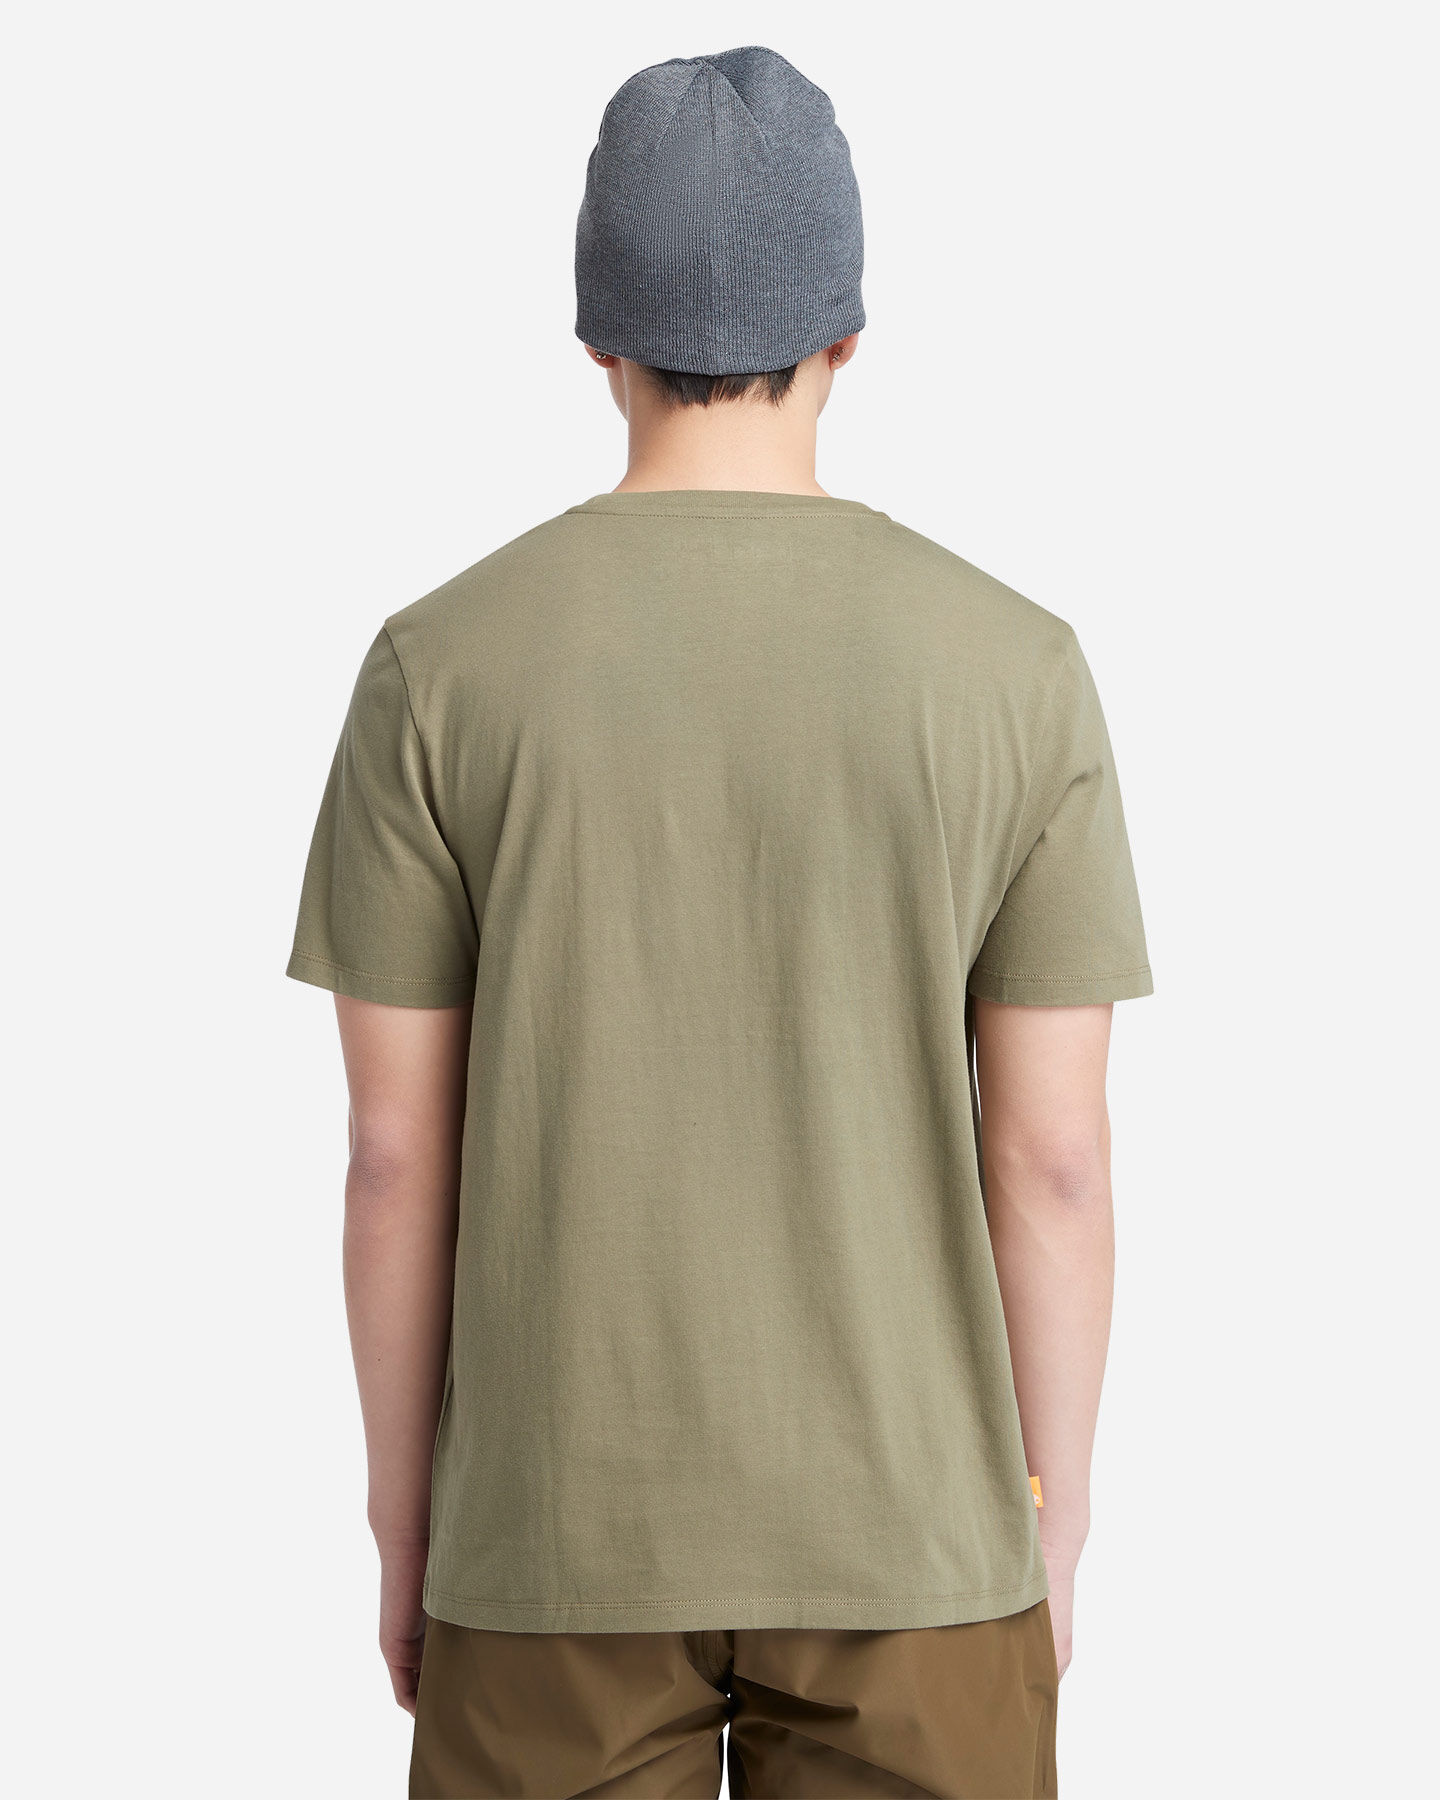  T-Shirt TIMBERLAND CAMO TREE M S4127278|5901|S scatto 2